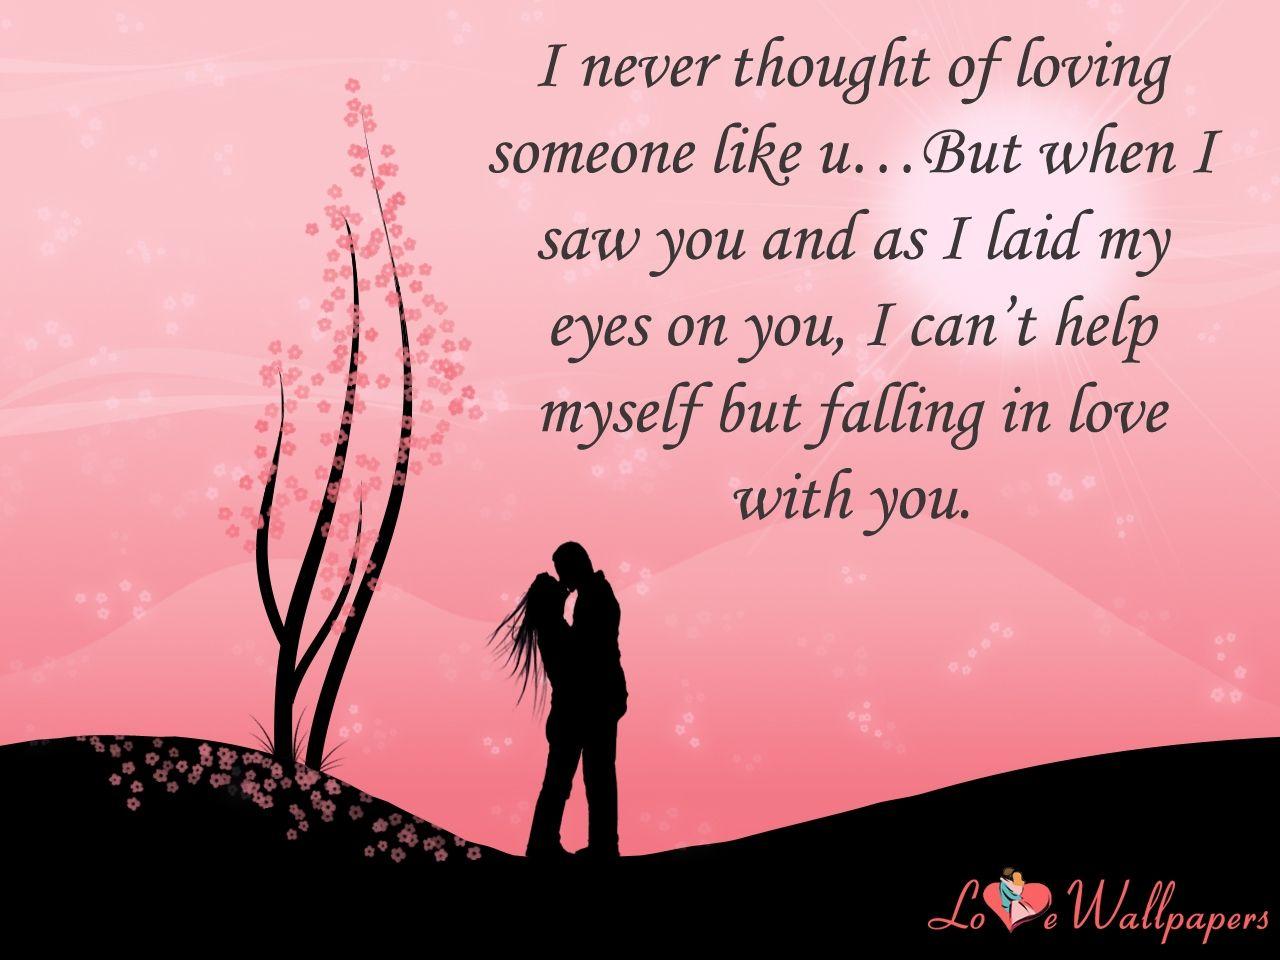 Best image of love thoughts download HD Wallpaper With